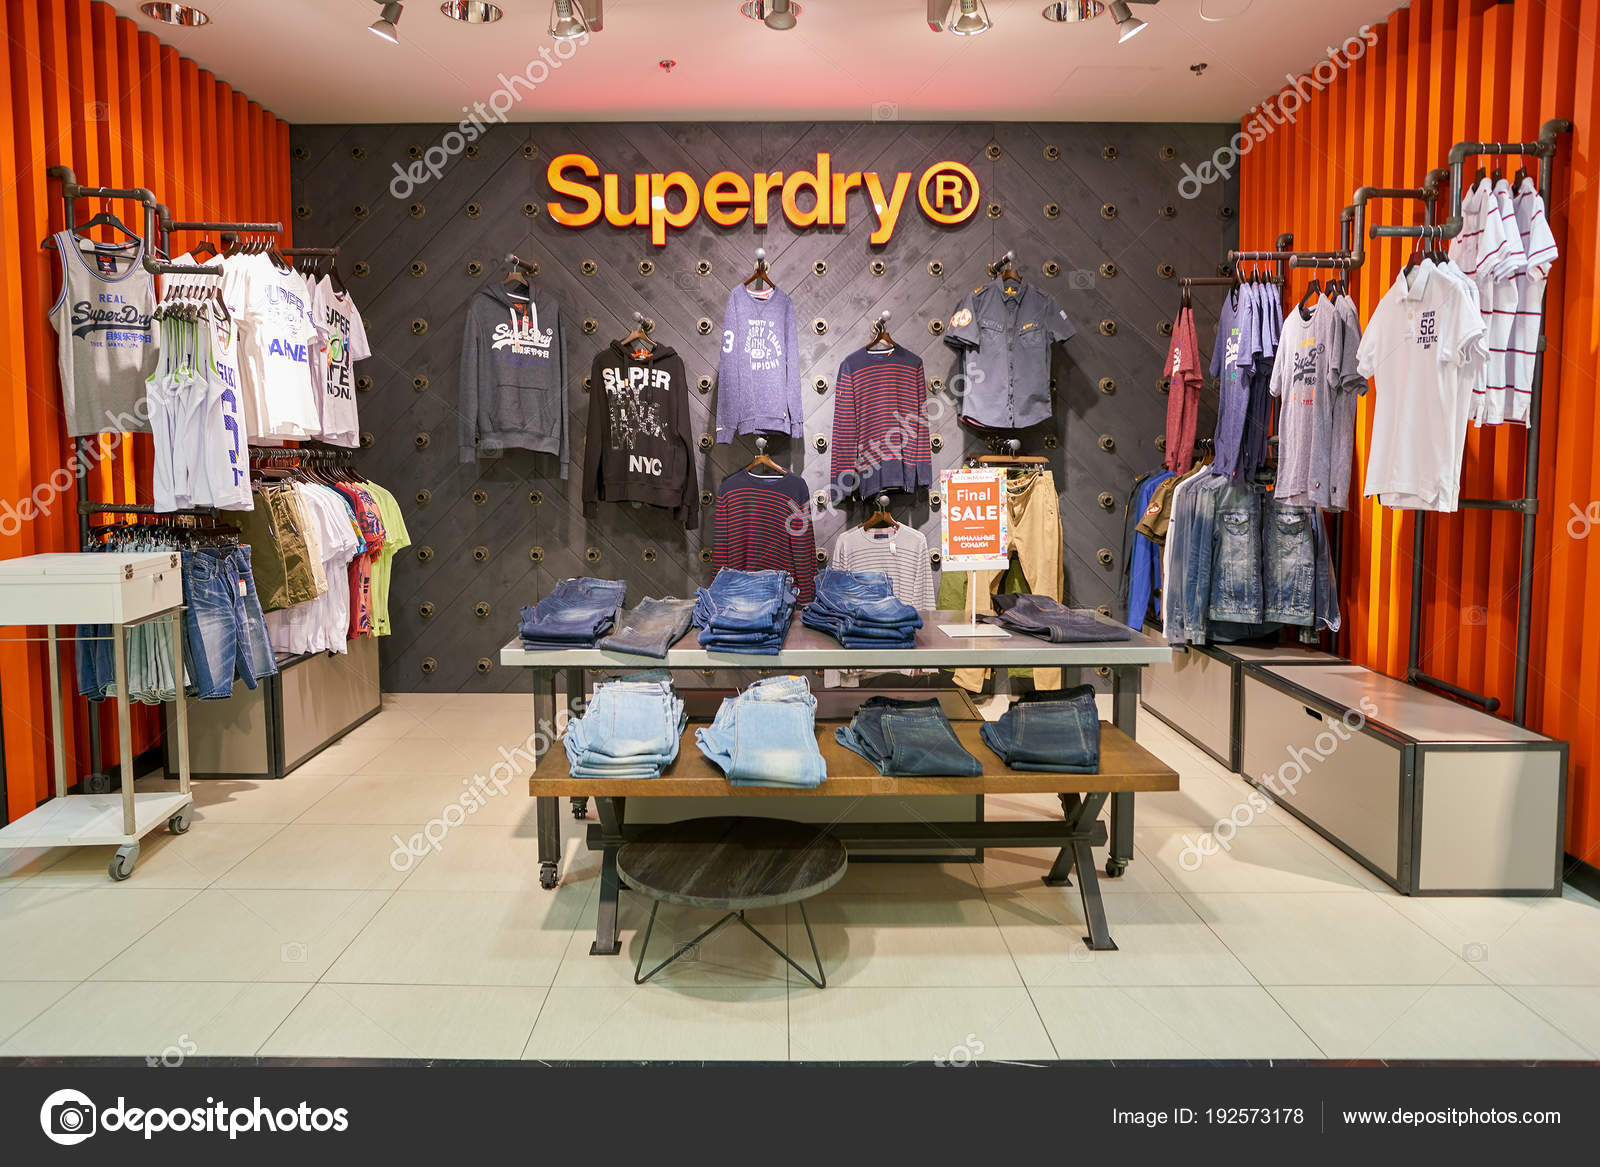 Superdry Stock Photos, Free Superdry Images Depositphotos